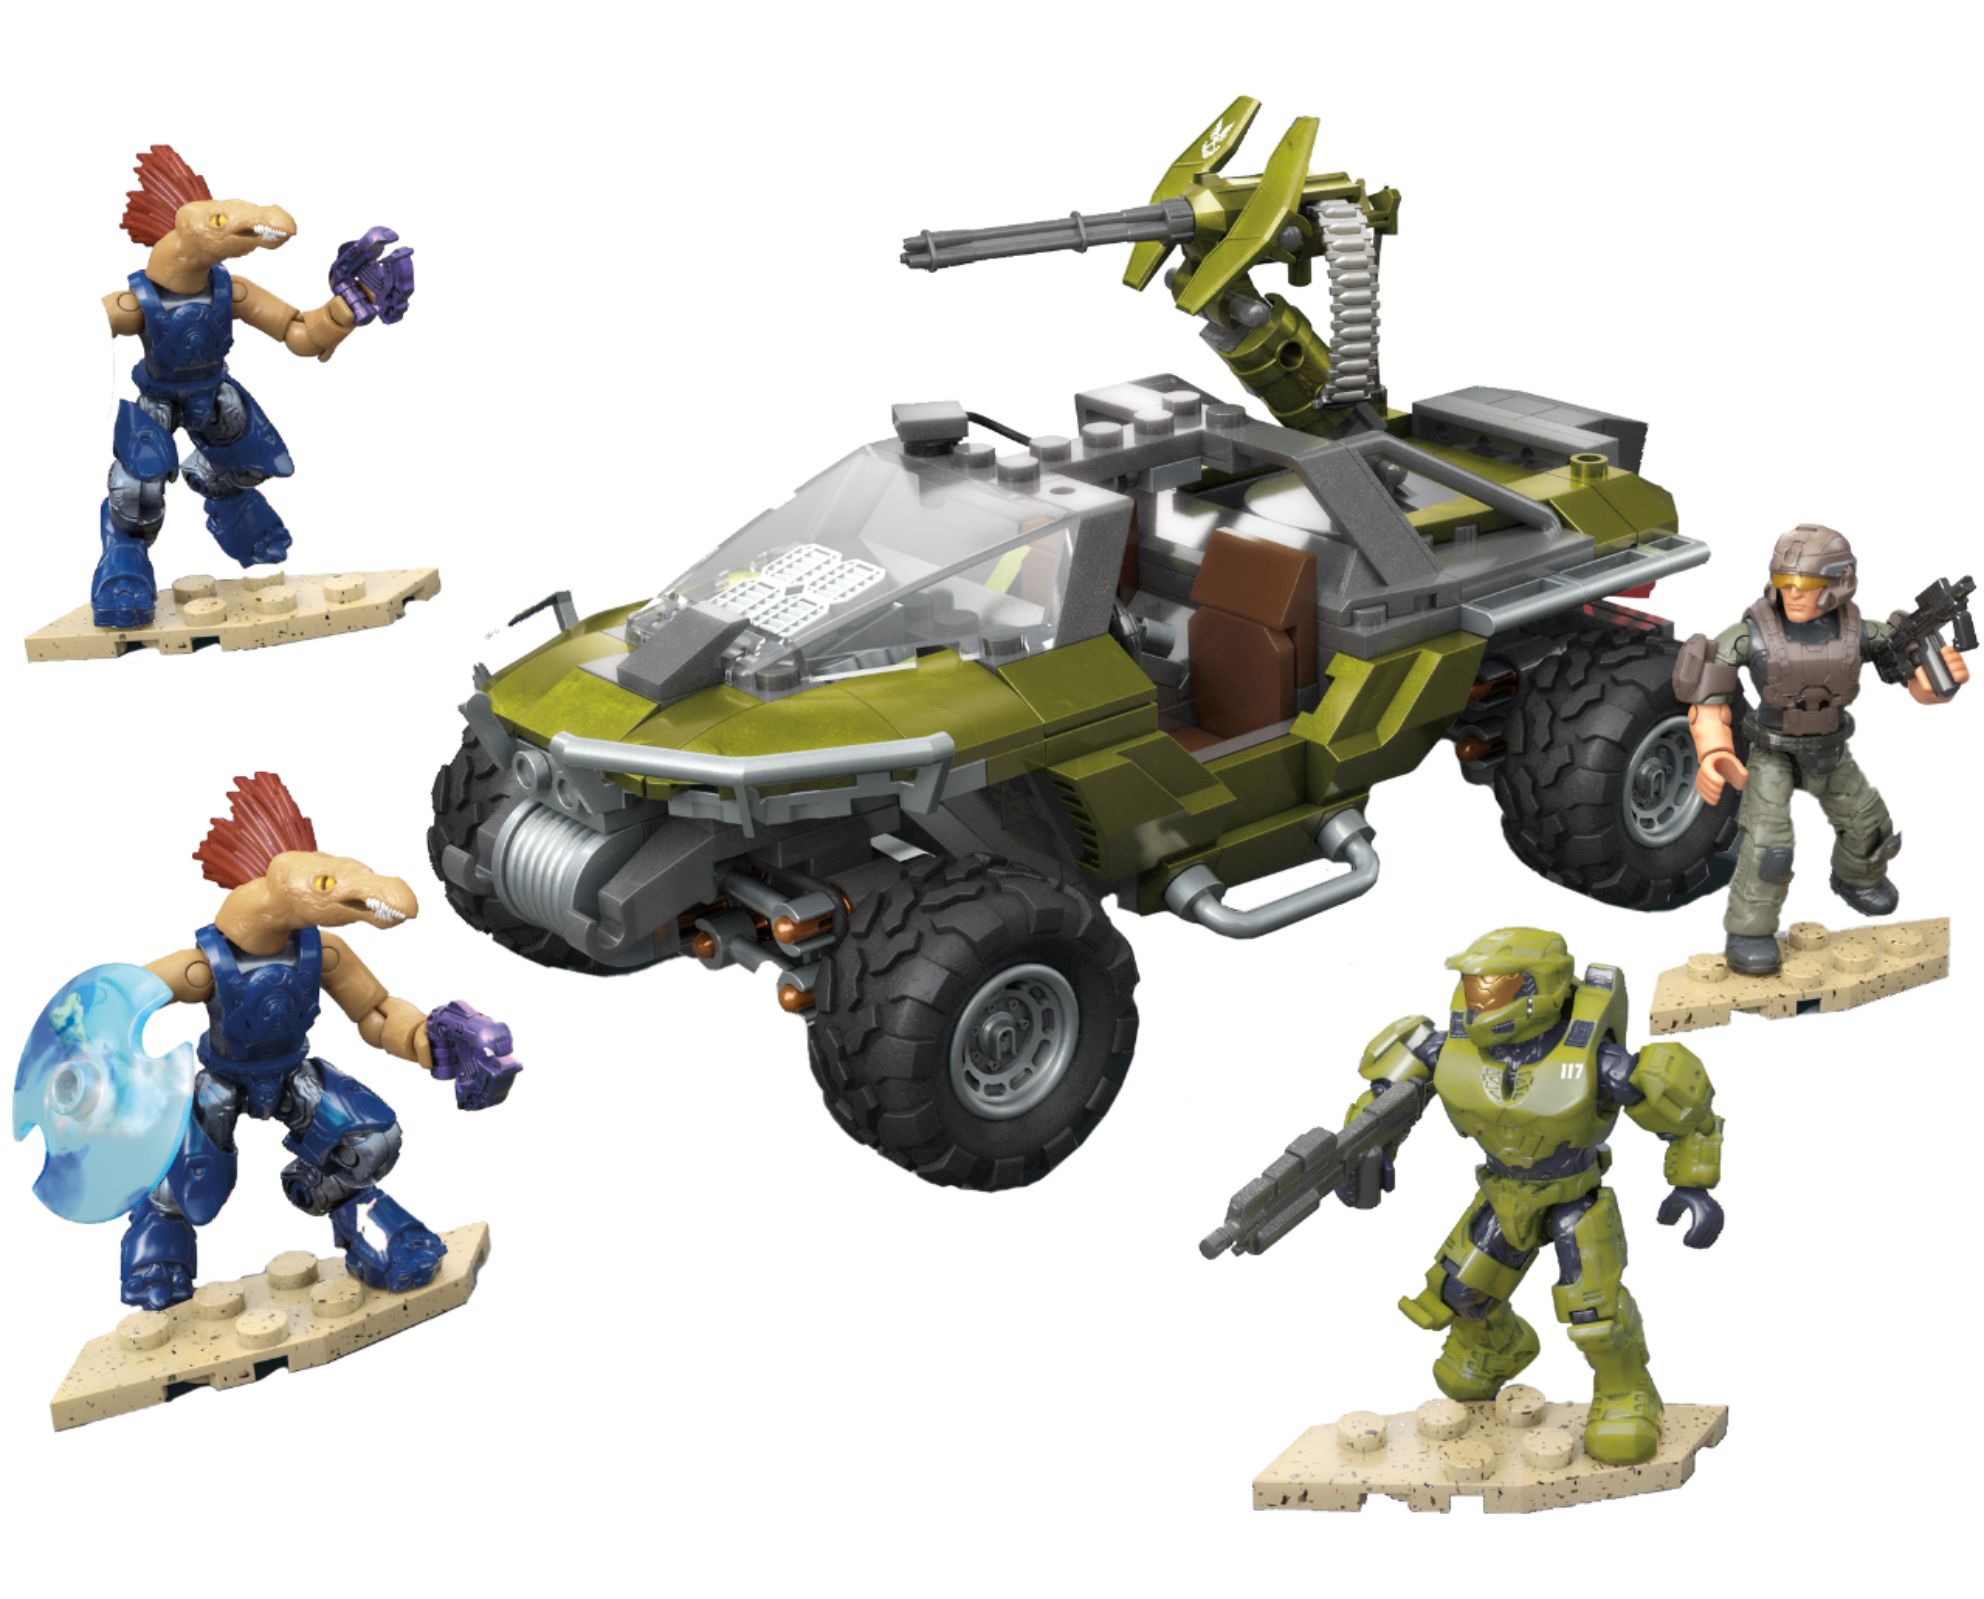 Left View: MEGA Halo Warthog Rally vehicle Halo Infinite Construction Set with Master Chief character figure, Building Toys for Kids